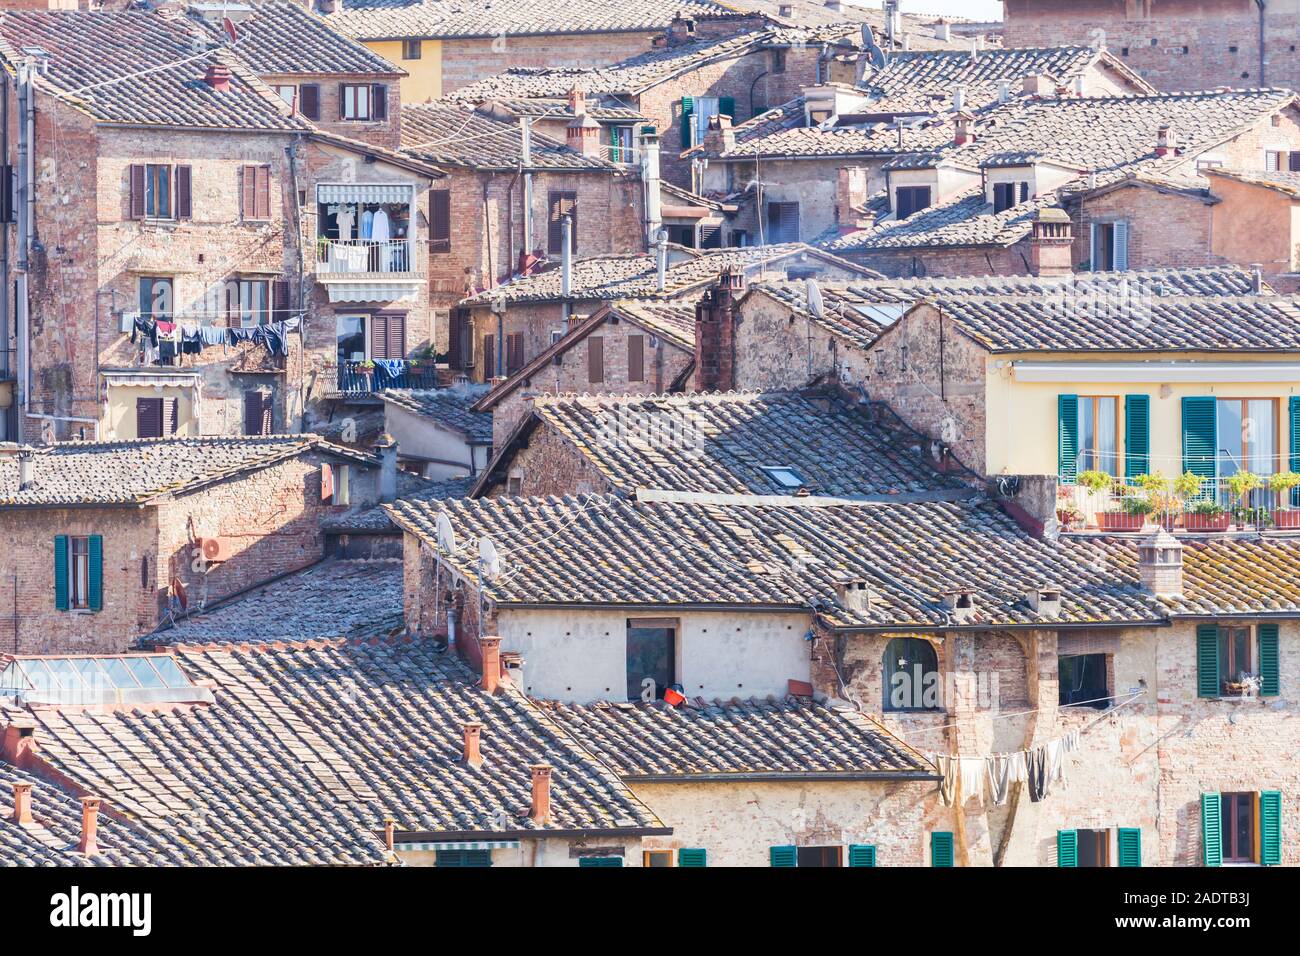 view on the roofs of the houses consisting of bricks and tiles creating the city architecture of Siena, Tuscany, Italy Stock Photo